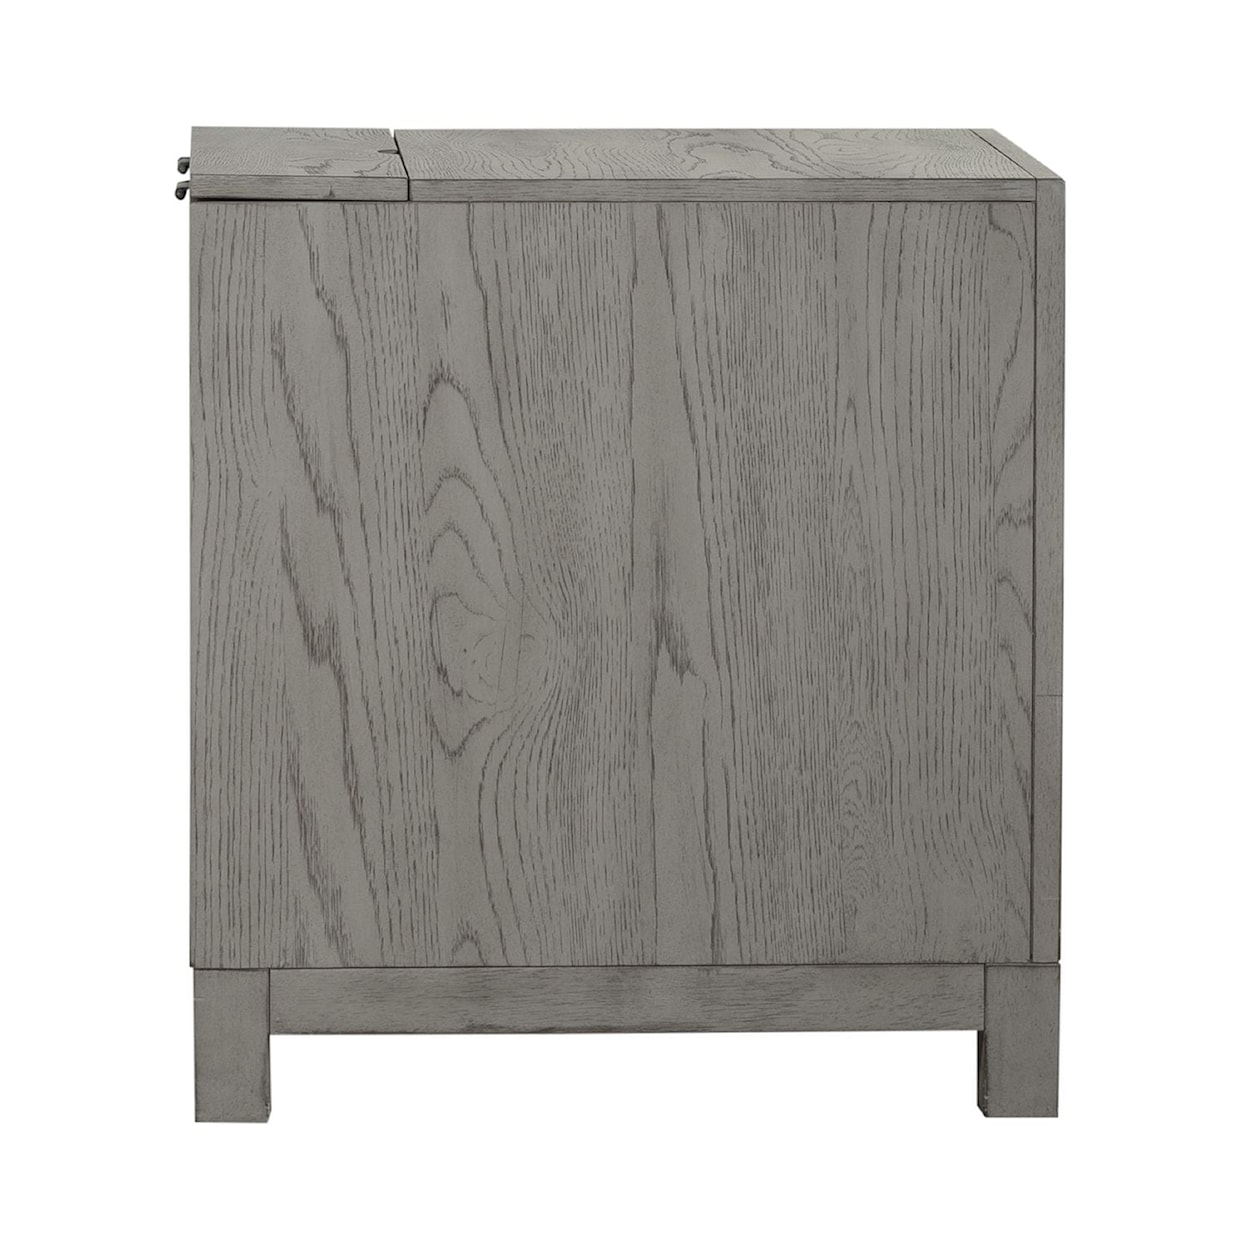 Libby Palmetto Heights 3-Drawer Chairside Table